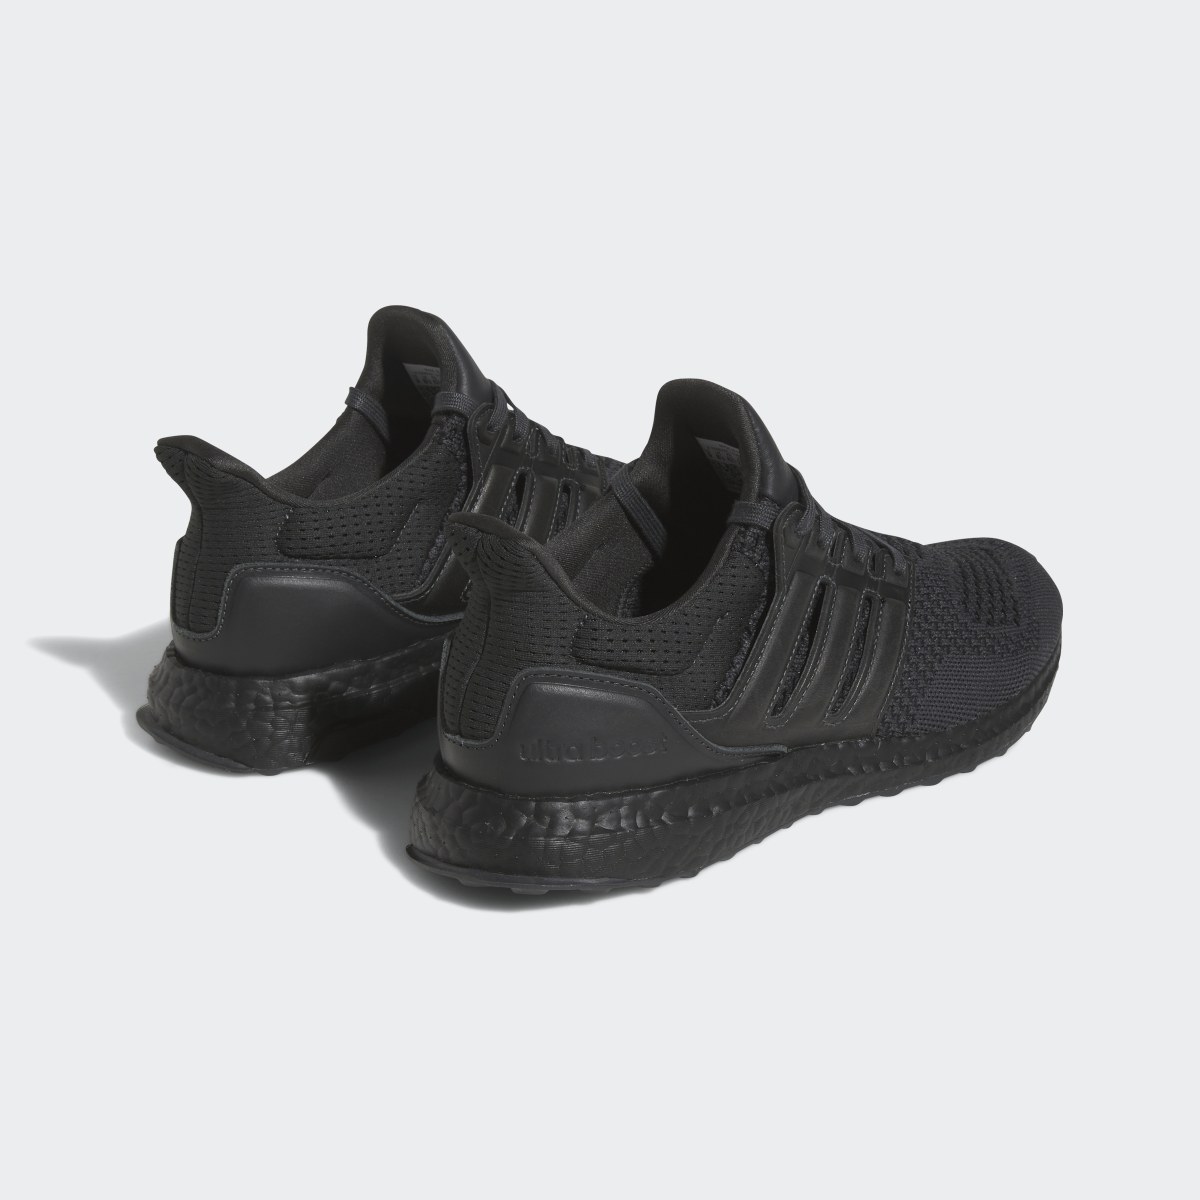 Adidas Ultraboost 1 DNA Shoes. 9